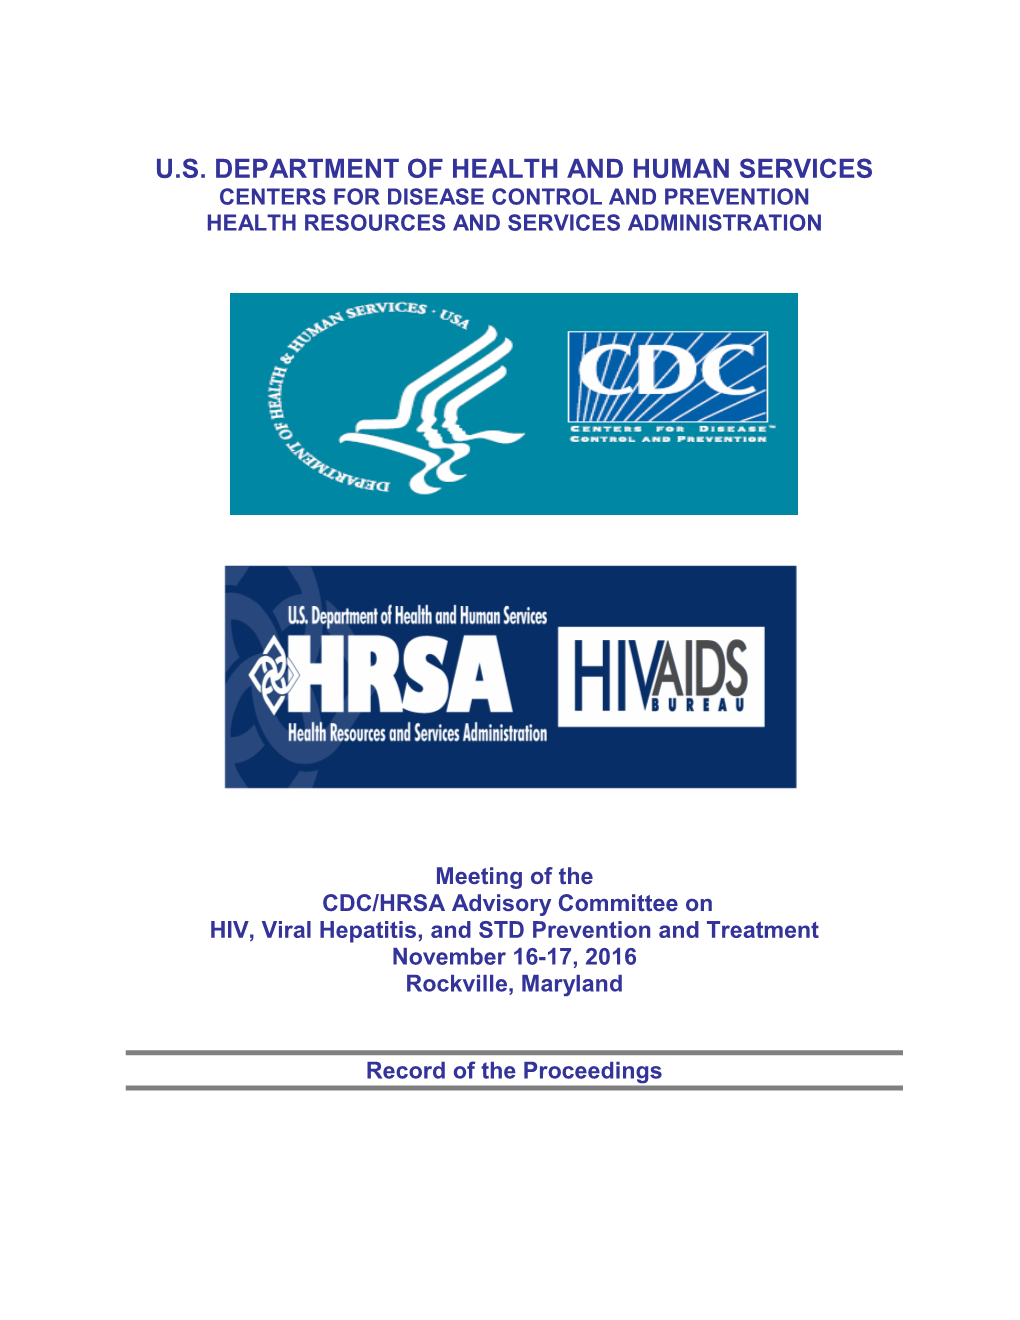 Meeting of the CDC/HRSA Advisory Committee on HIV, Viral Hepatitis, and STD Prevention and Treatment November 16-17, 2016 Rockville, Maryland